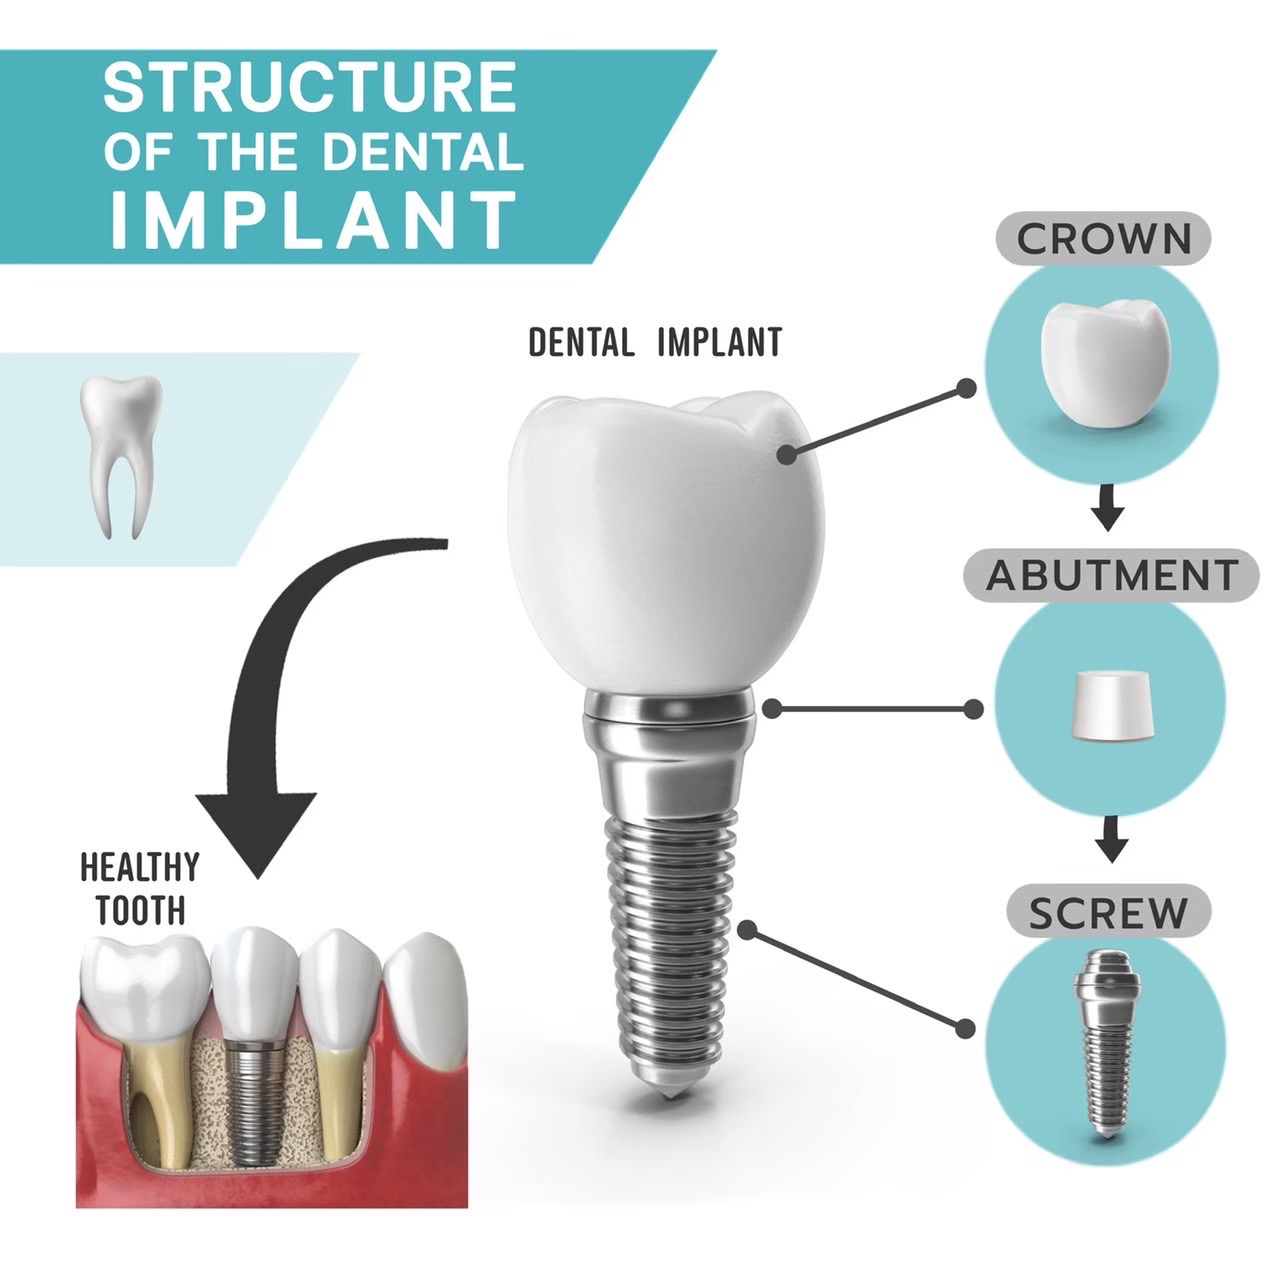 More about dental implants